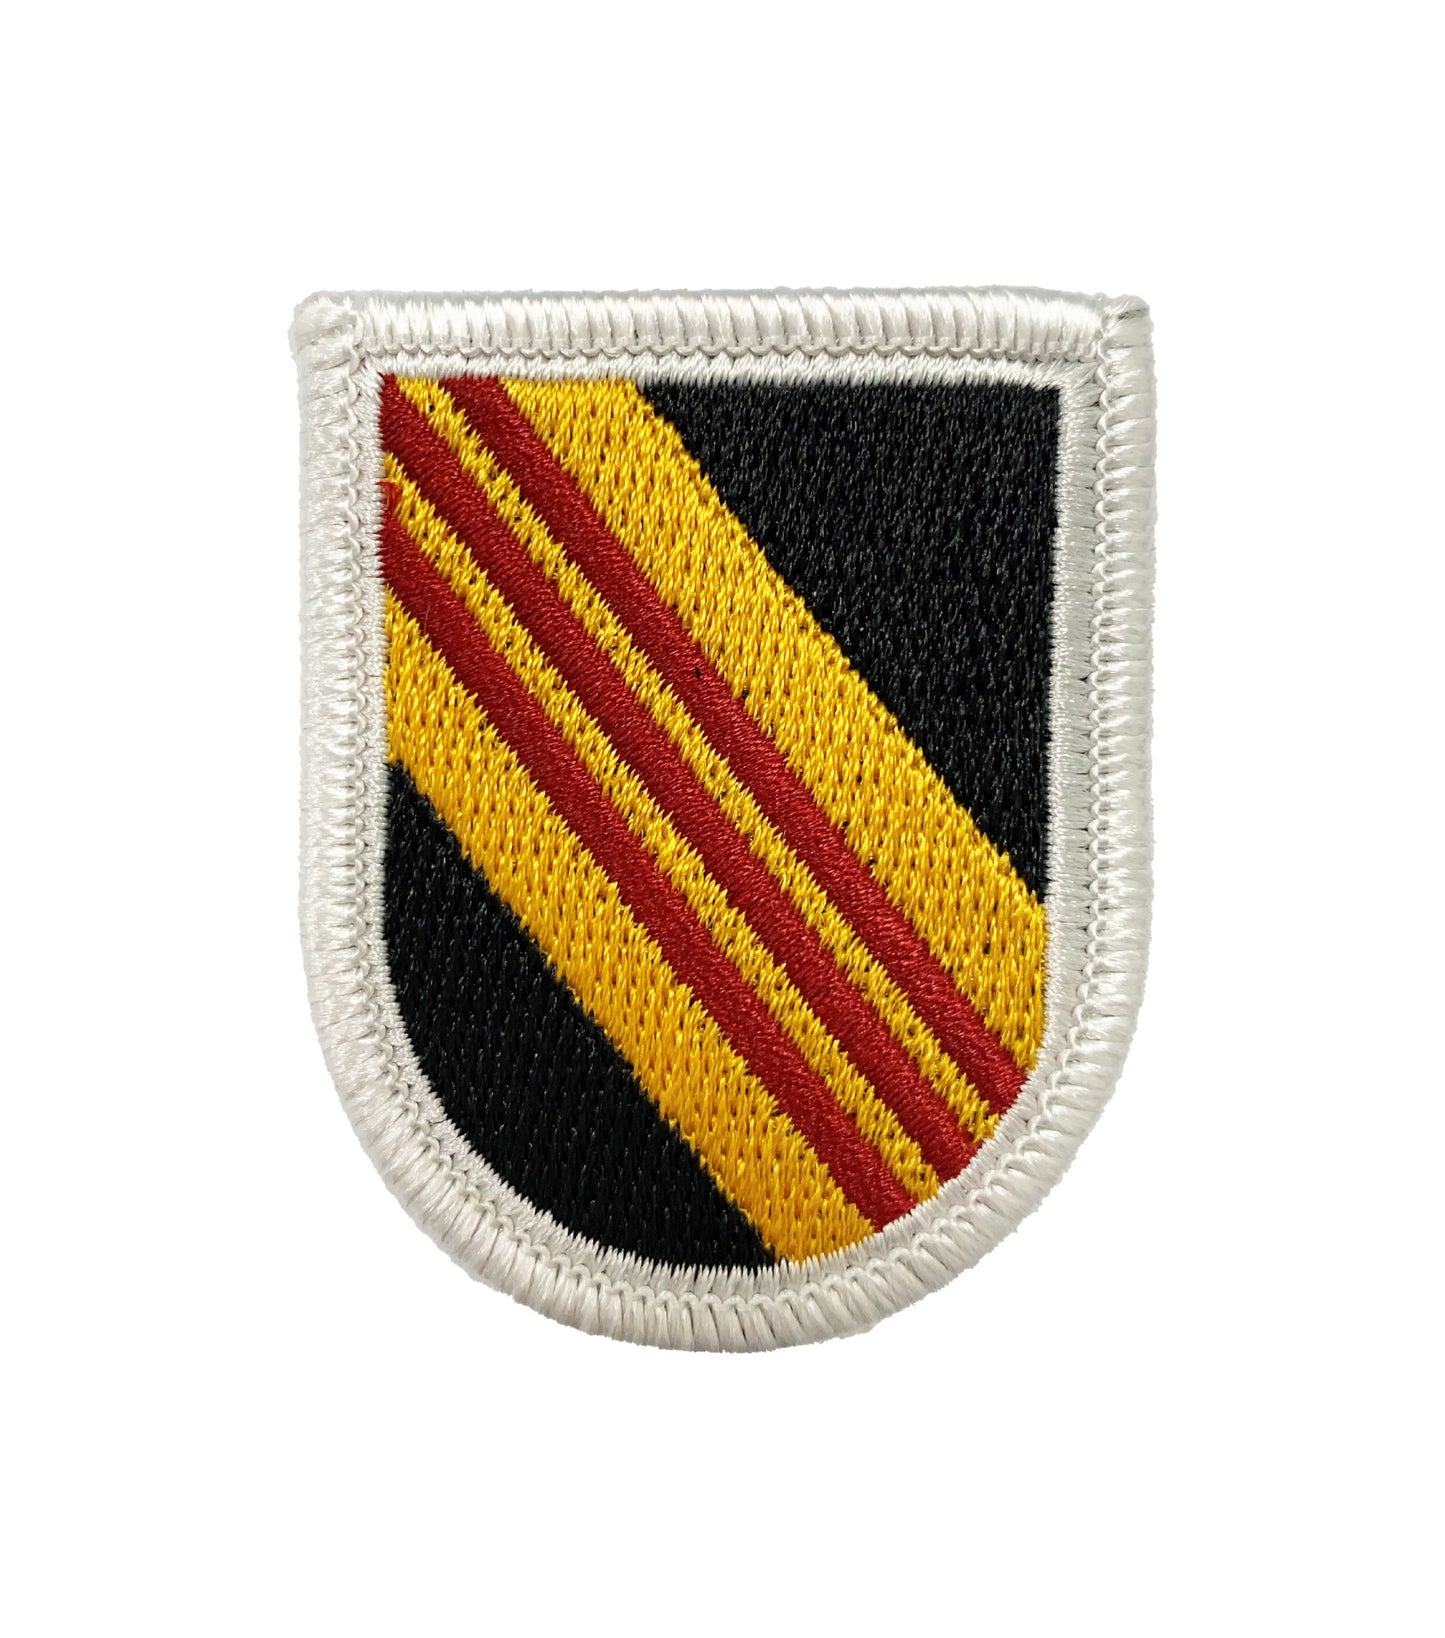 US Army 5th Special Forces Vietnam Flash